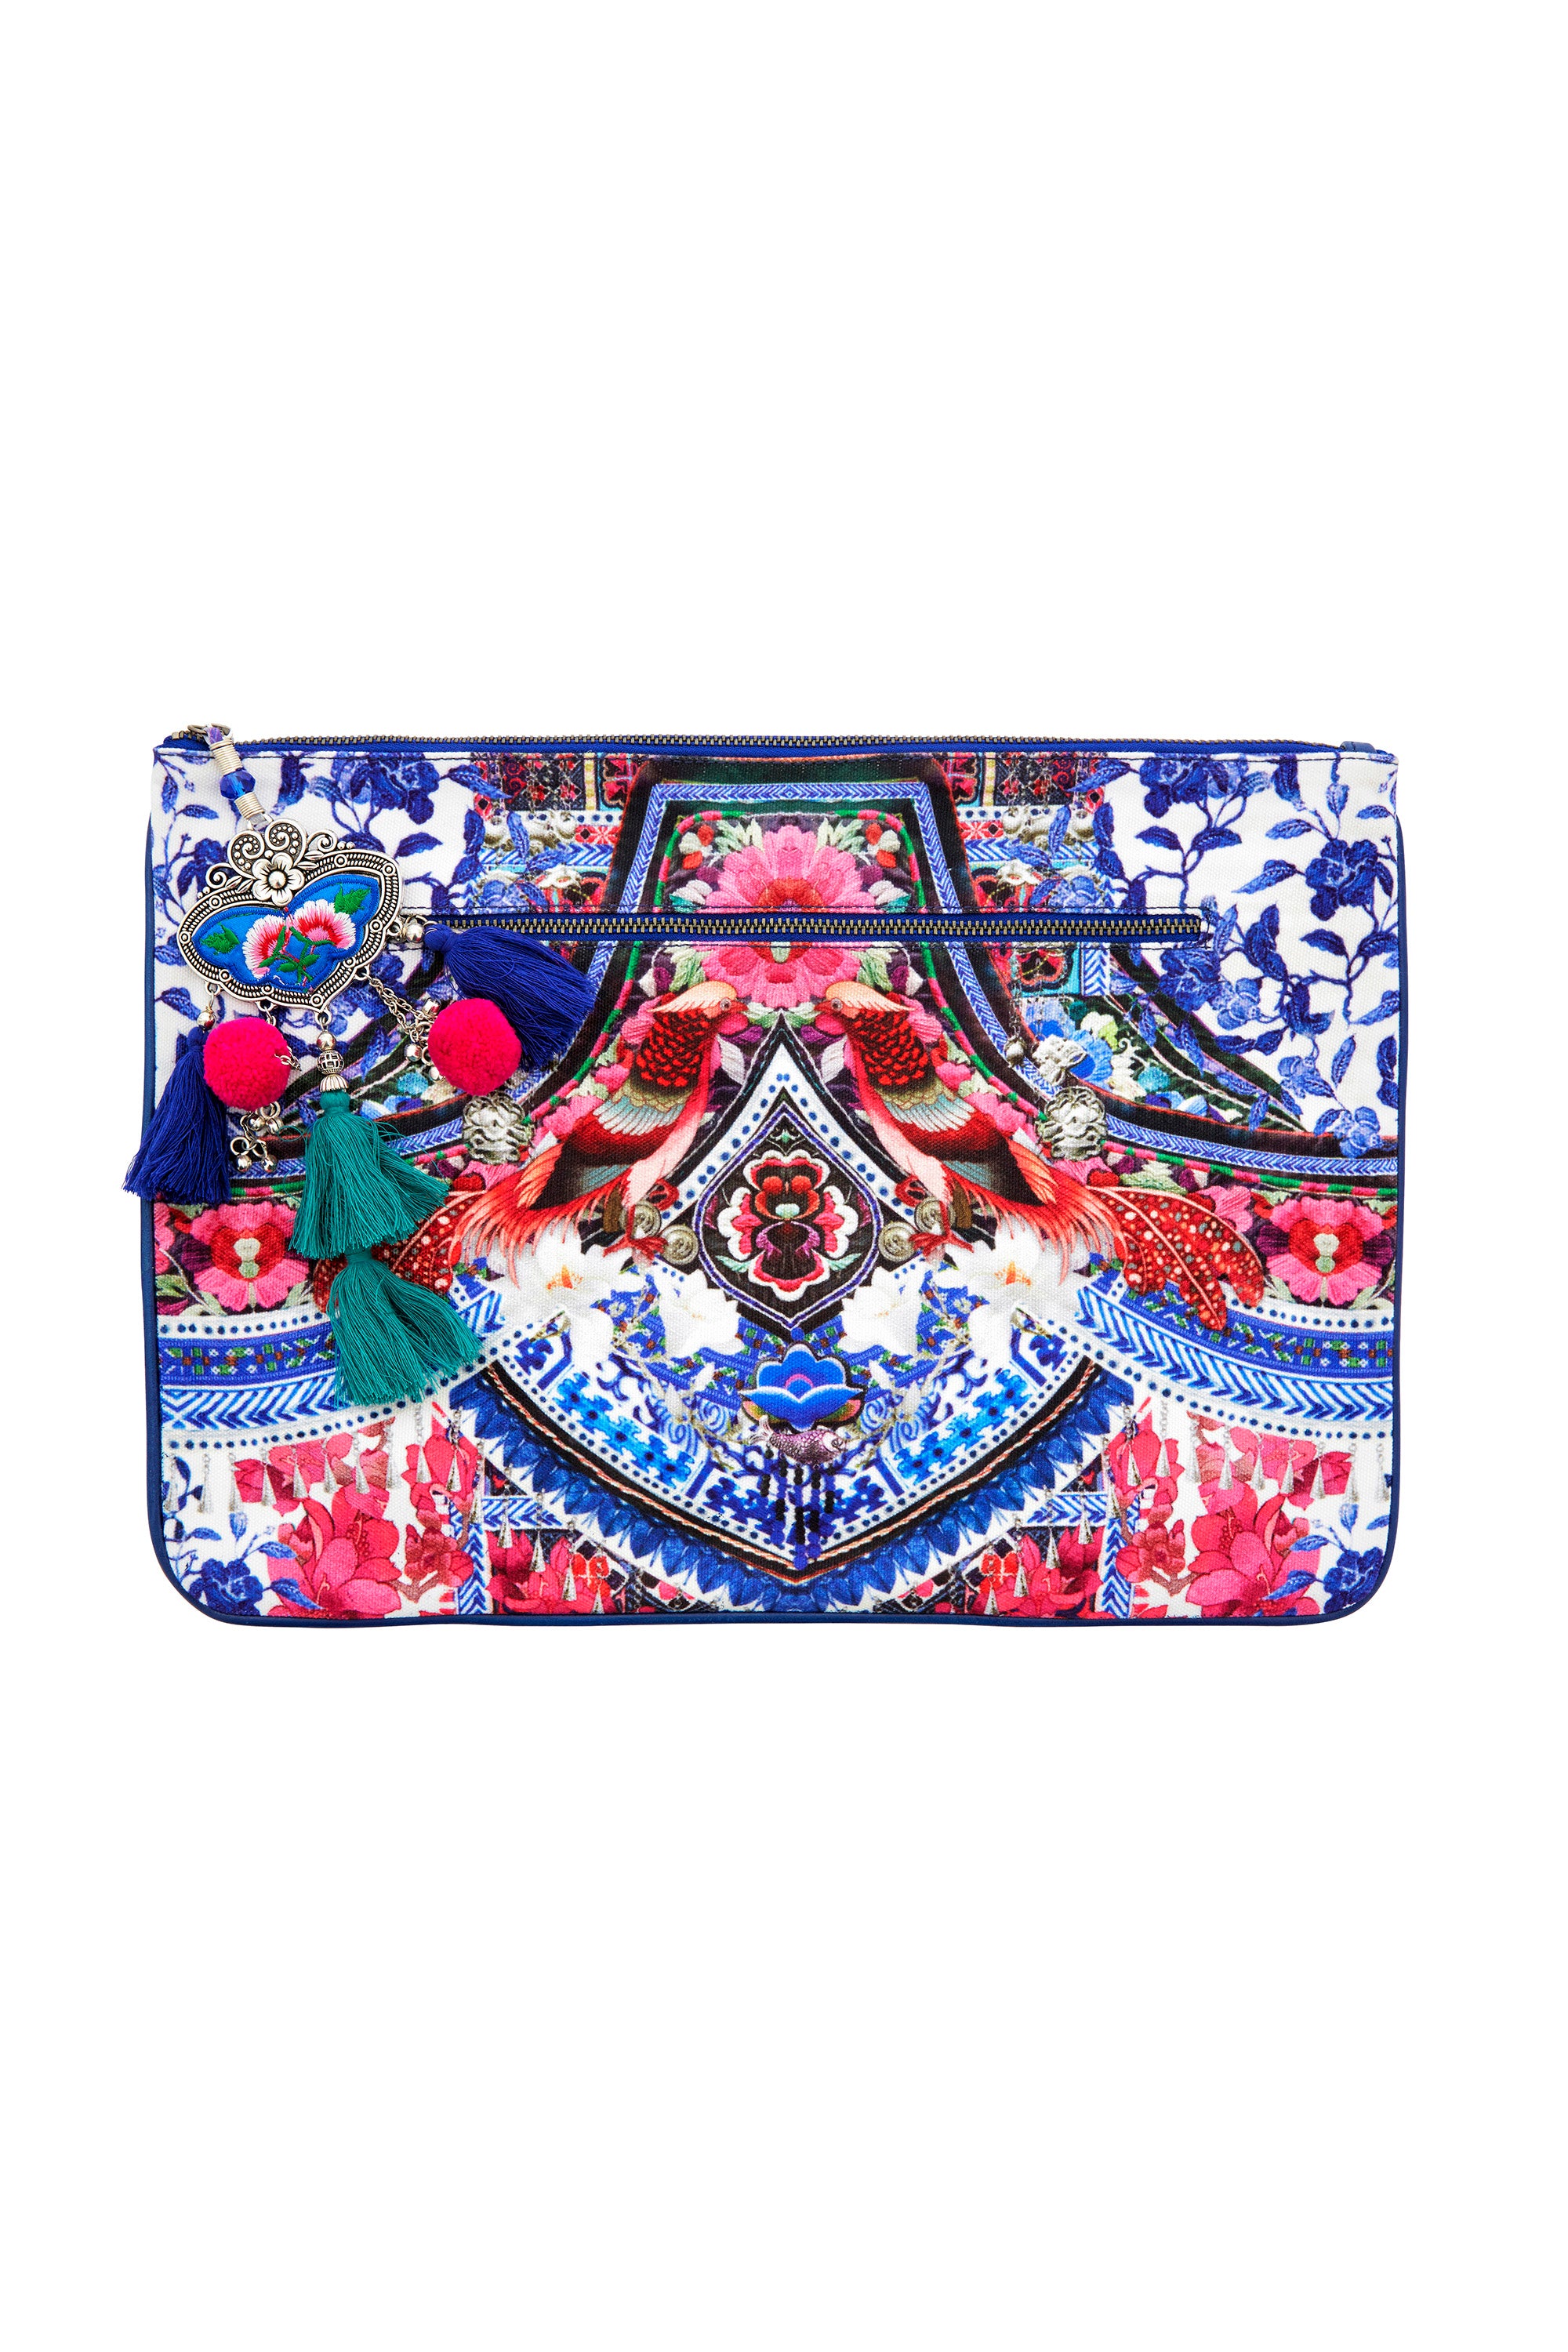 FROM KAILI WITH LOVE LARGE CANVAS CLUTCH